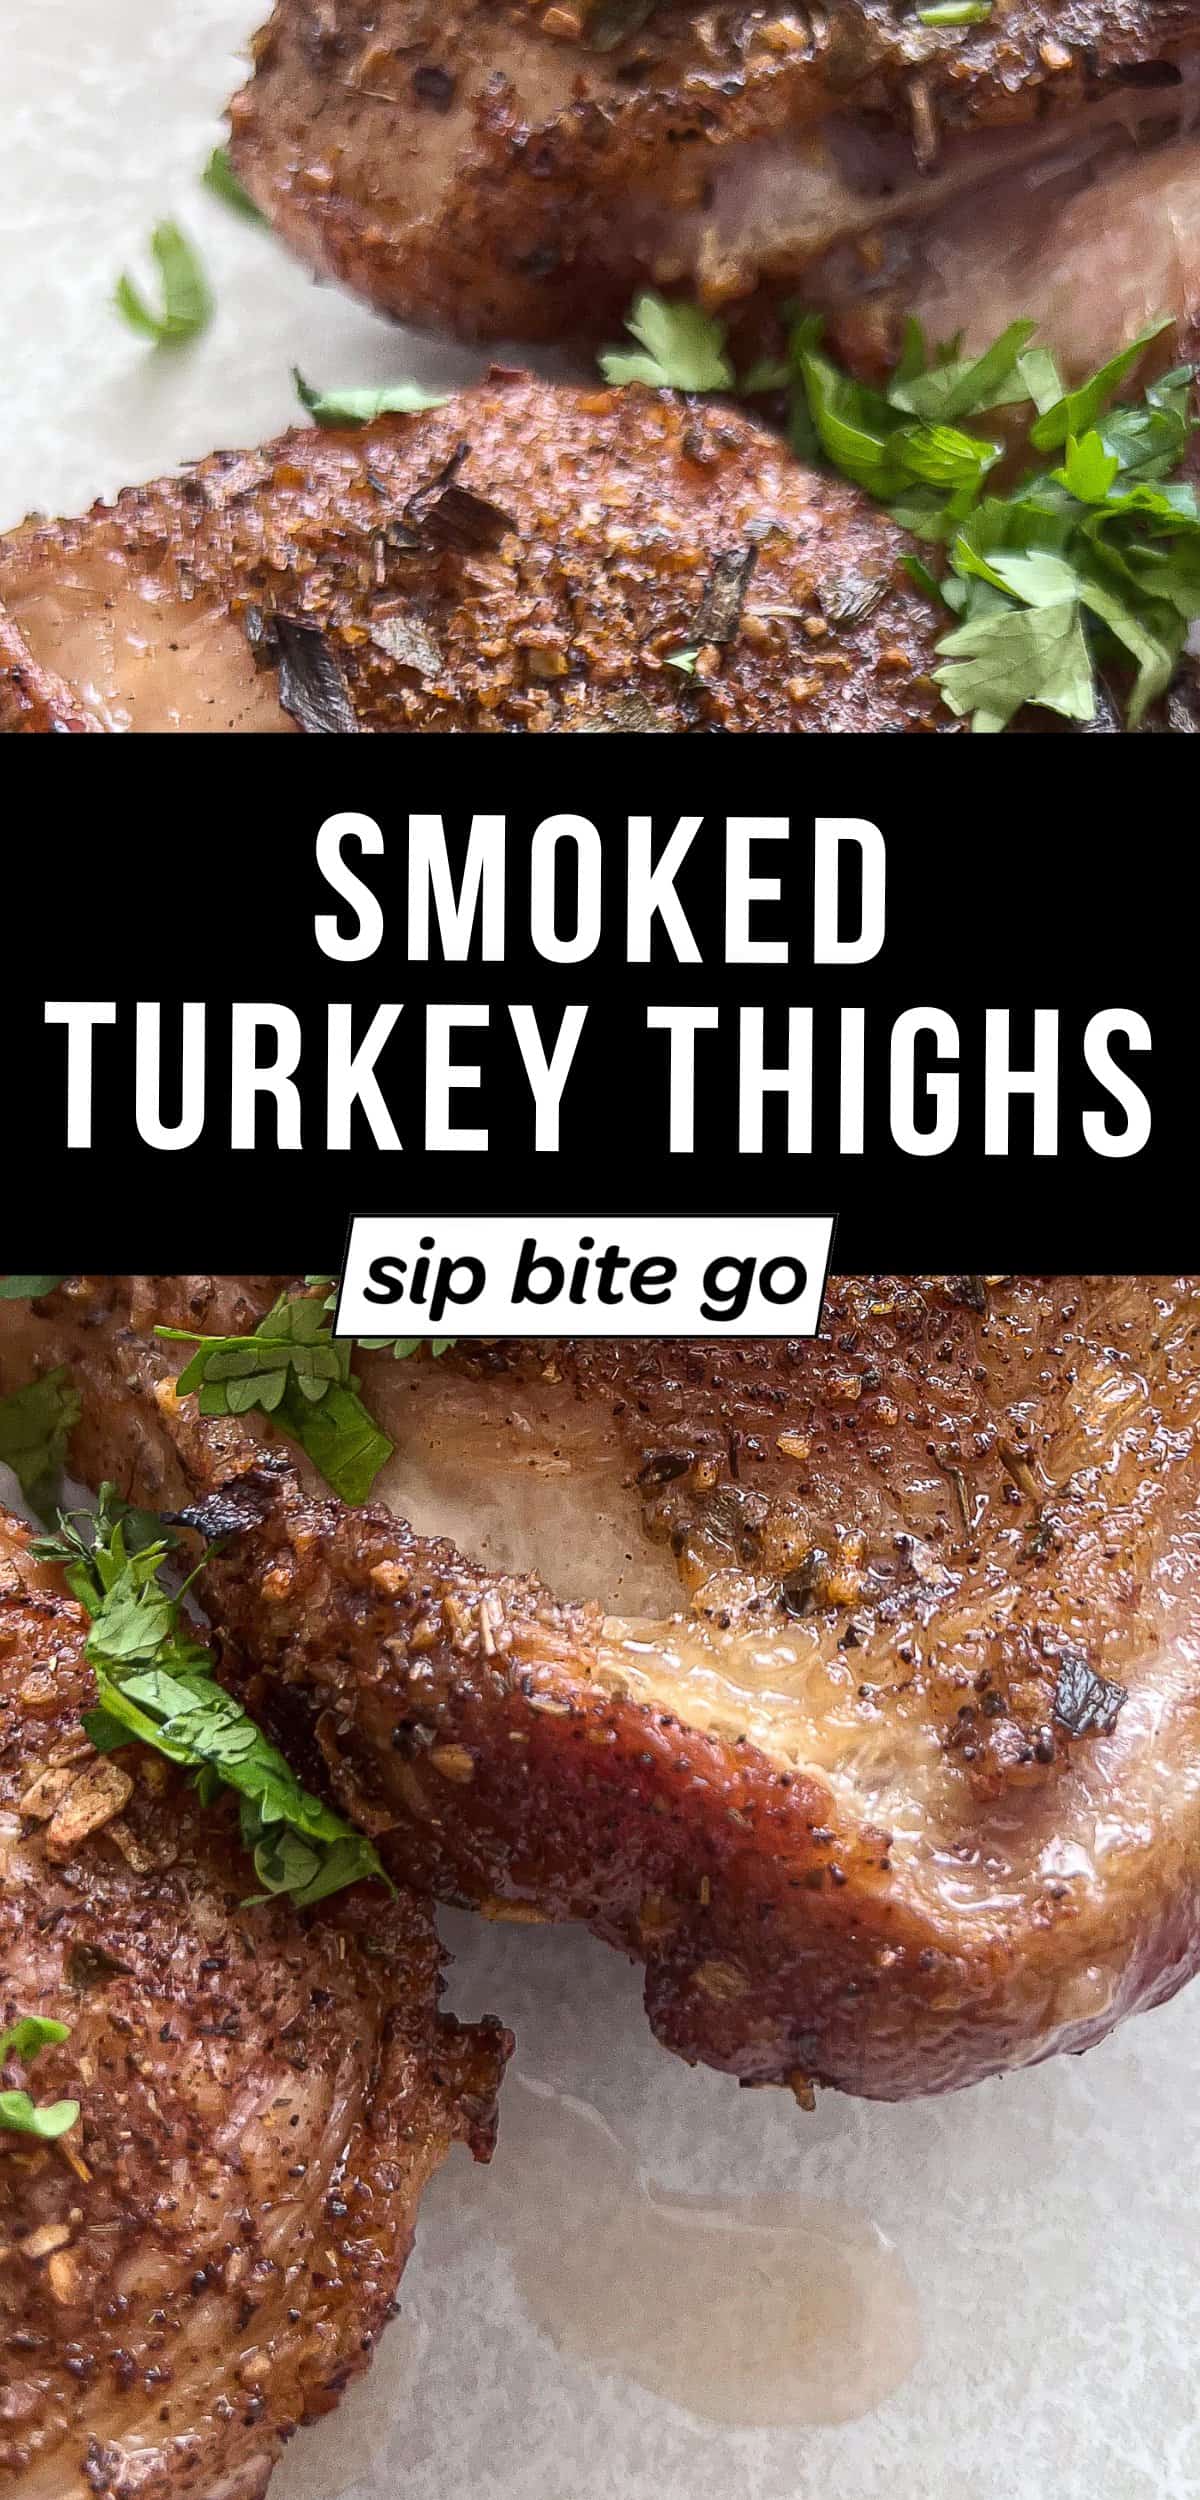 Traeger Smoked Turkey Thighs recipe with text overlay and Sip Bite Go logo